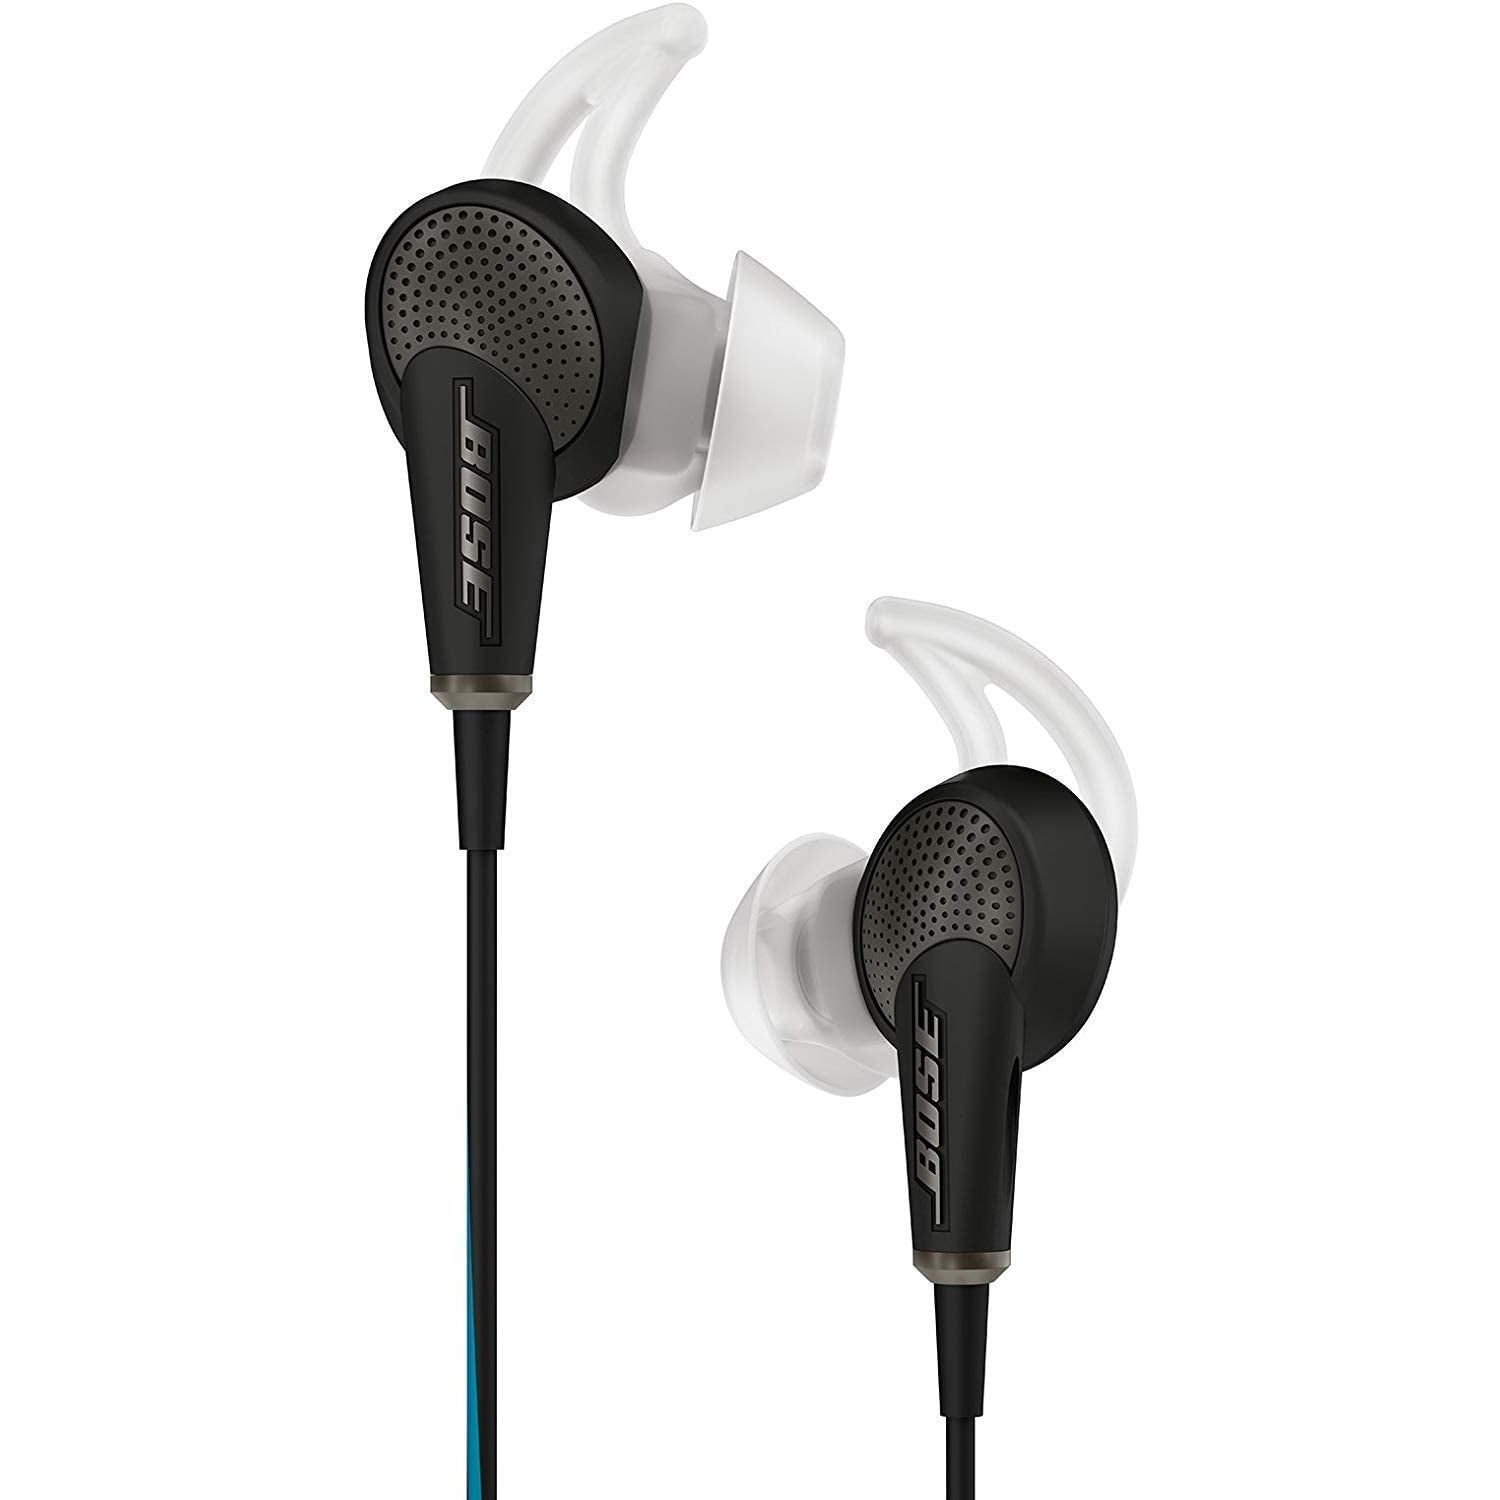 Bose QuietComfort 20 Acoustic Noise Cancelling In-Ear Headphones